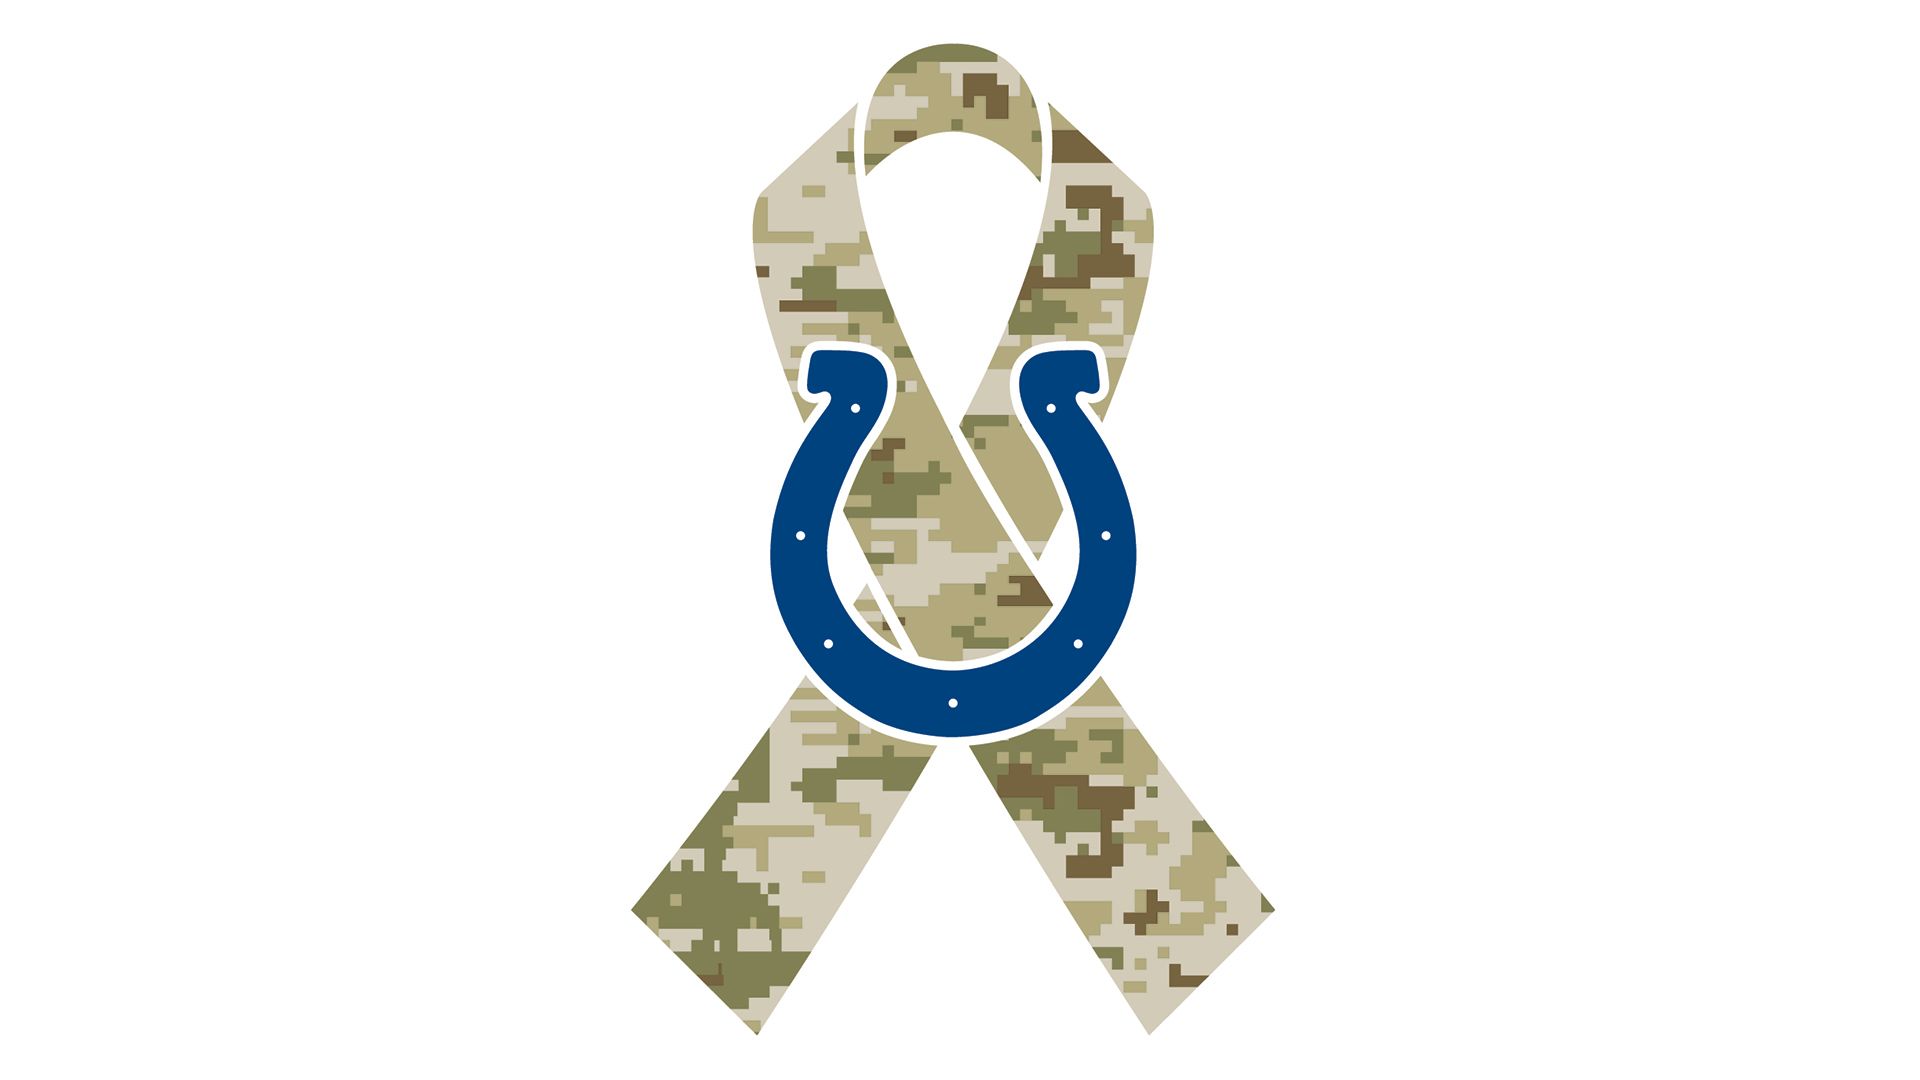 The Official Website of the Indianapolis Colts